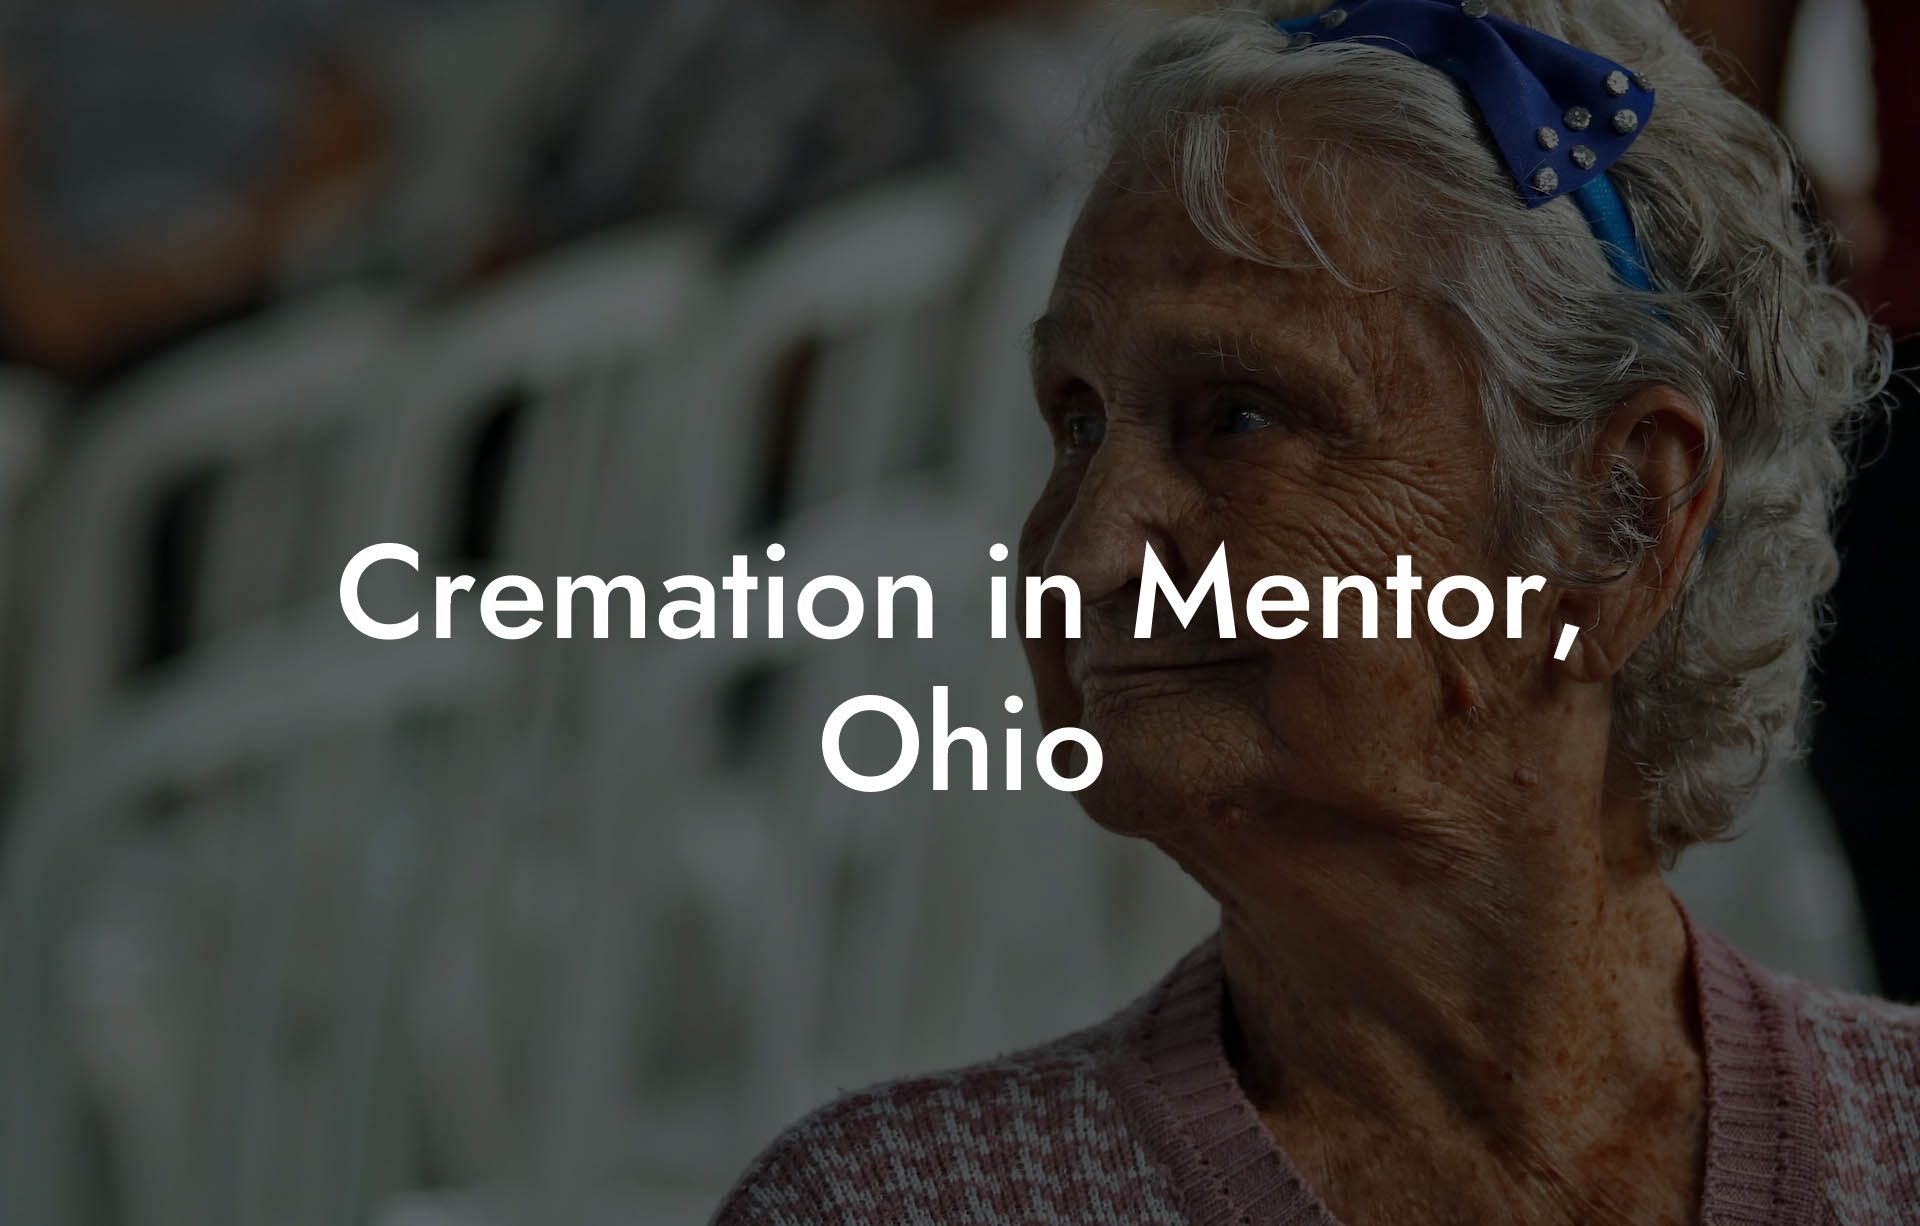 Cremation in Mentor, Ohio